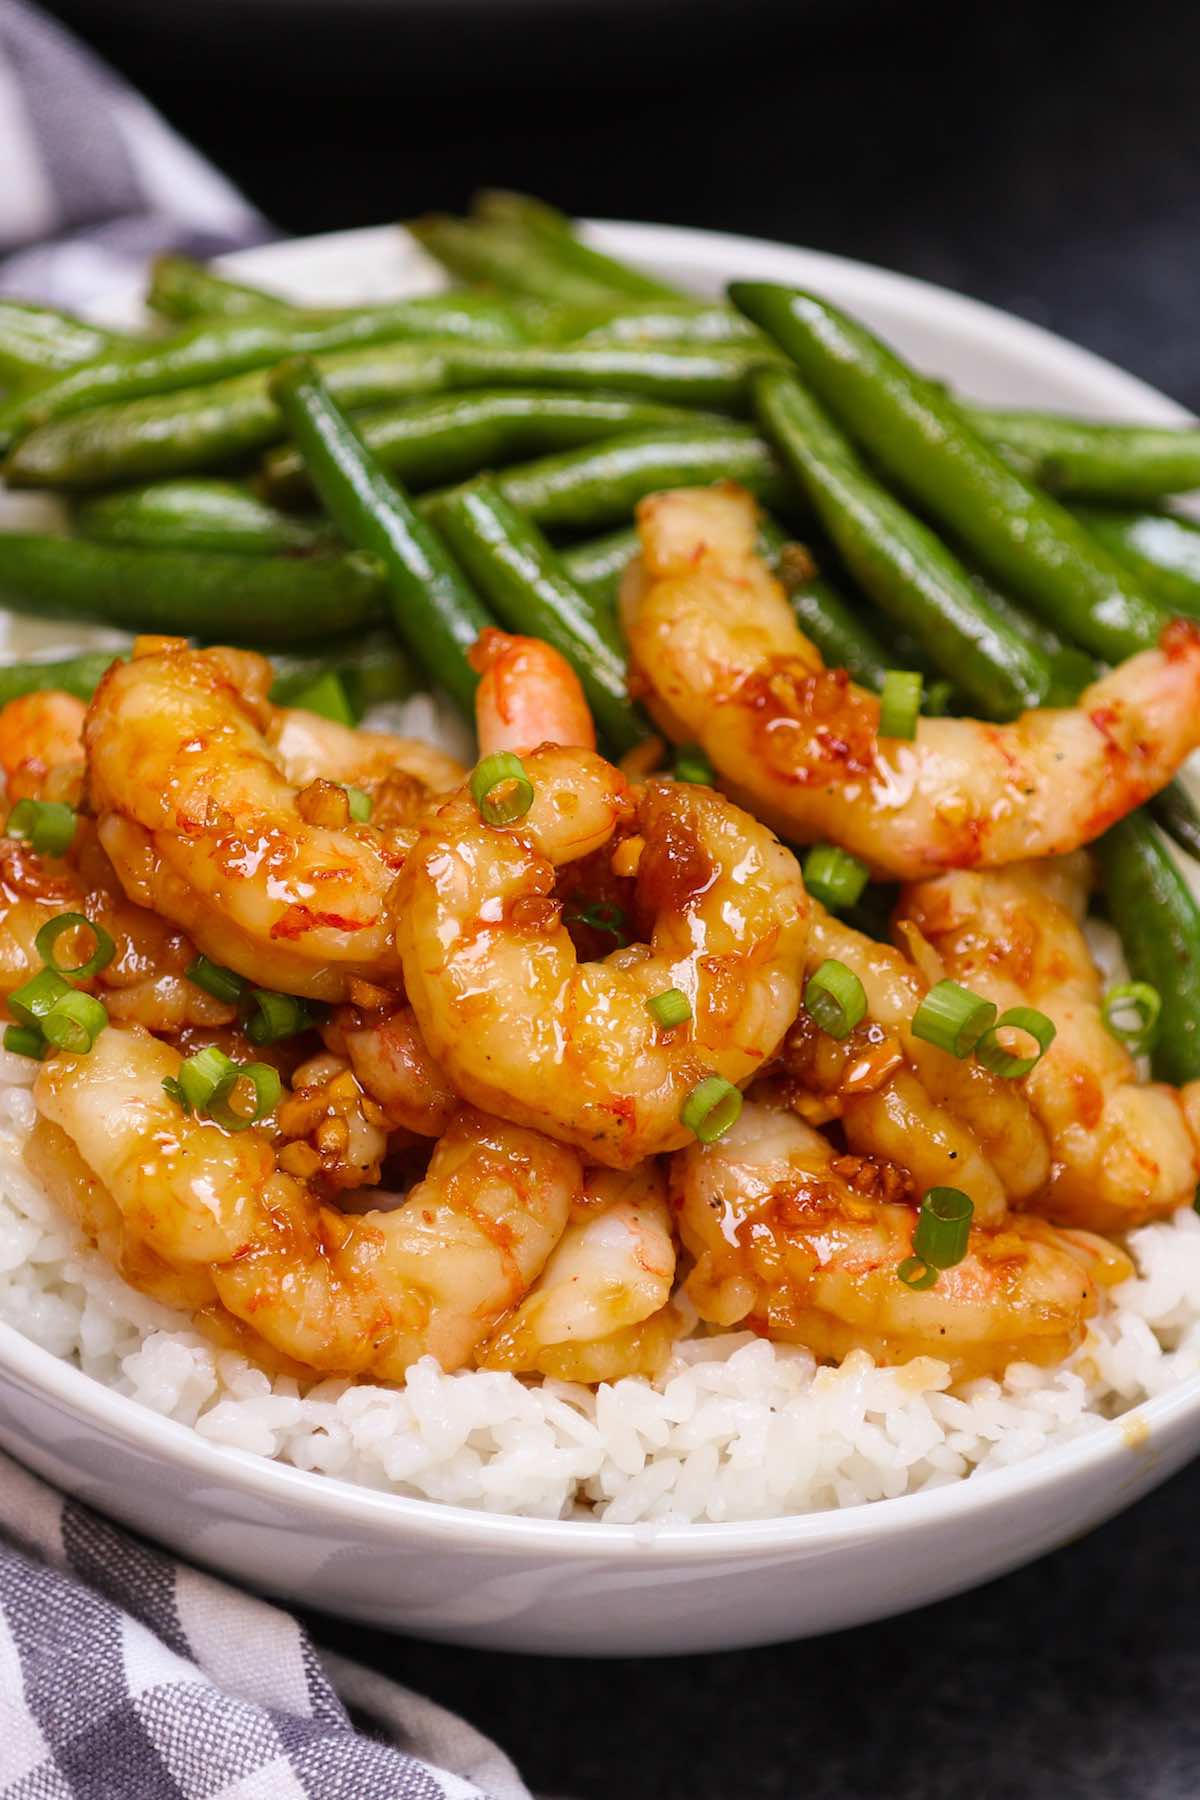 Sous vide honey garlic shrimp served with green beans over rice in a white bowl.